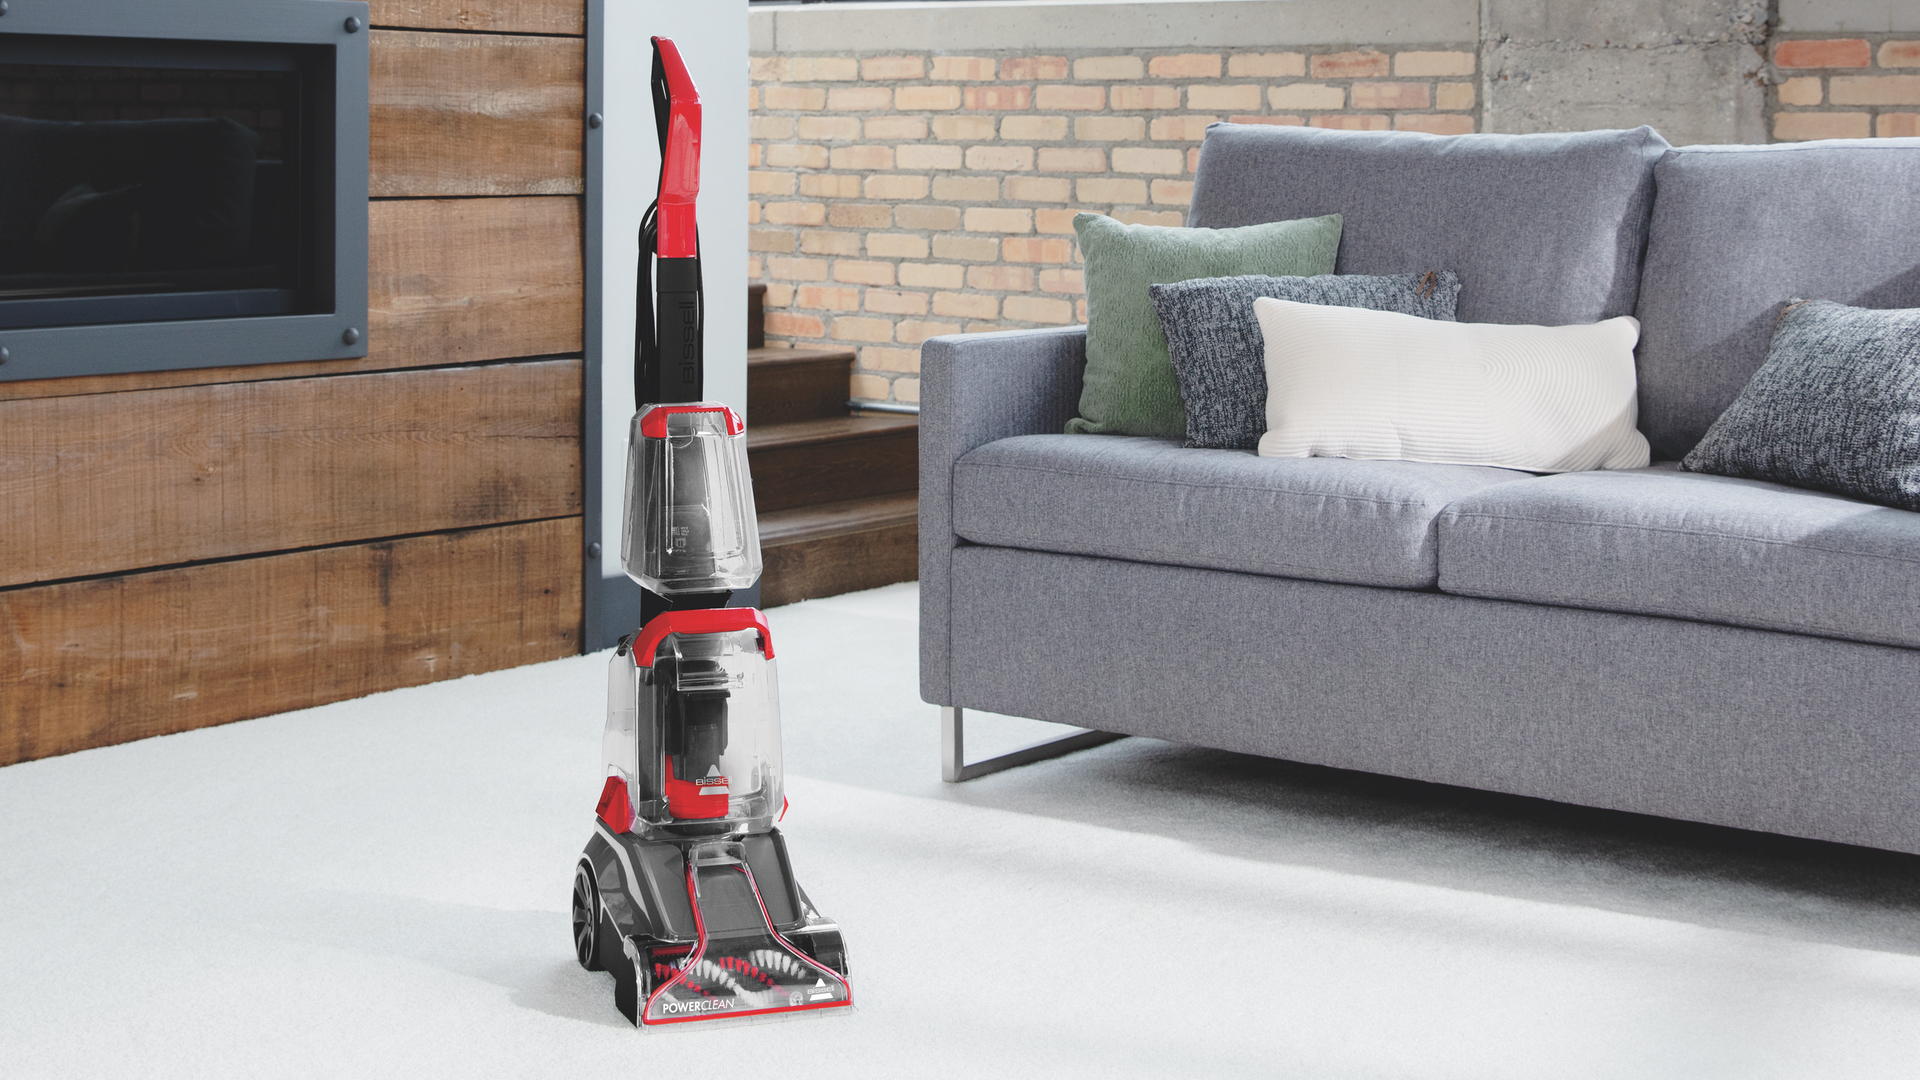 Bissell PowerClean review: a sterling budget-priced compact carpet cleaner  for smaller abodes